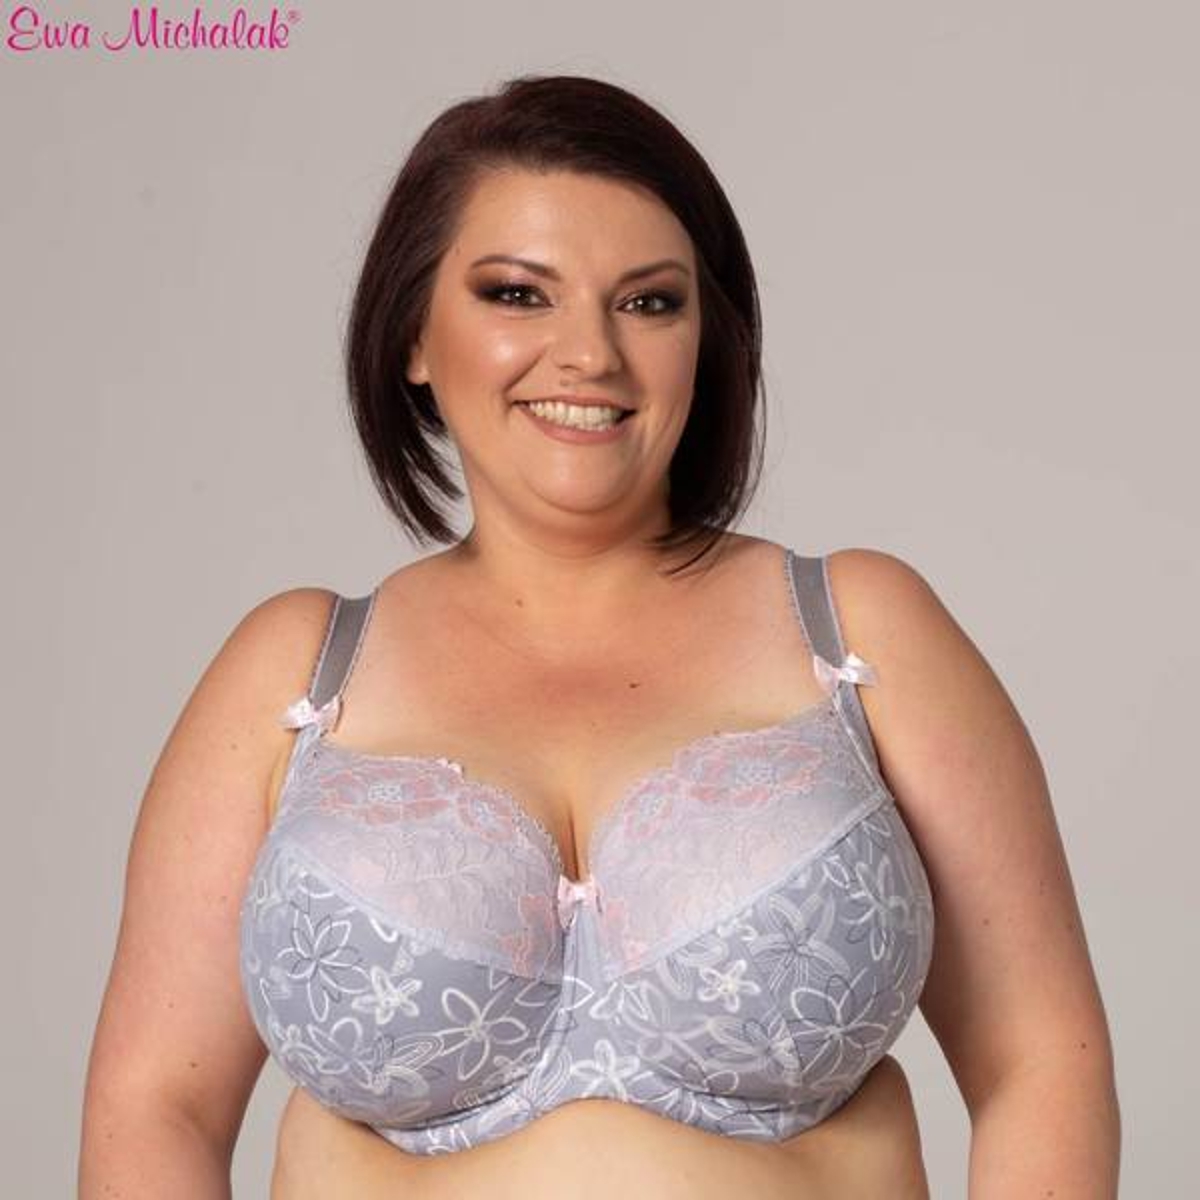 Ladies Underwired Full Cup Bra Large Bust Lace Firm Hold Plus Size